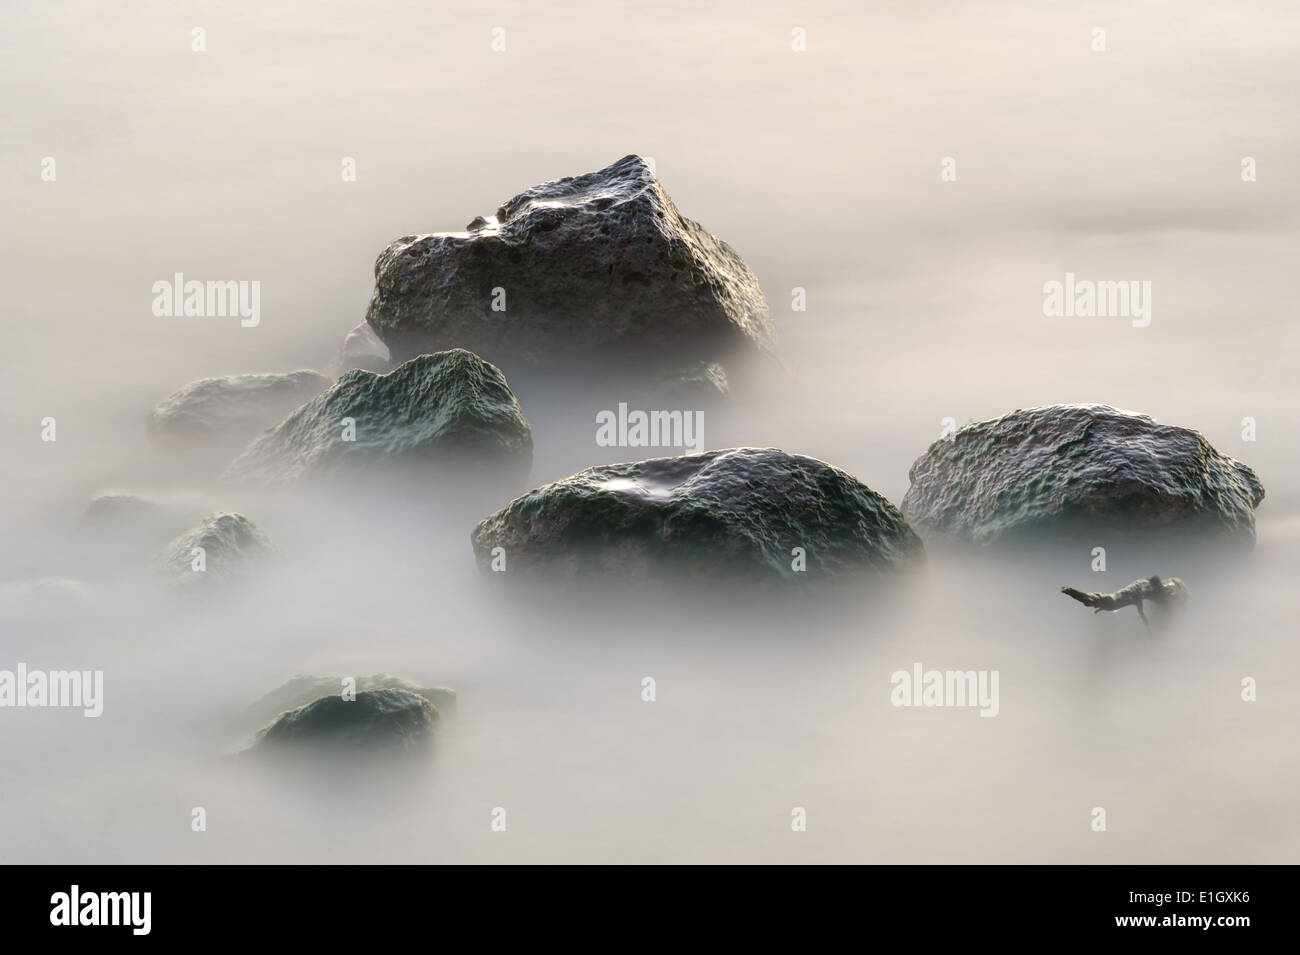 Stones in the lake early morning, wet from the rolling waves. Stock Photo